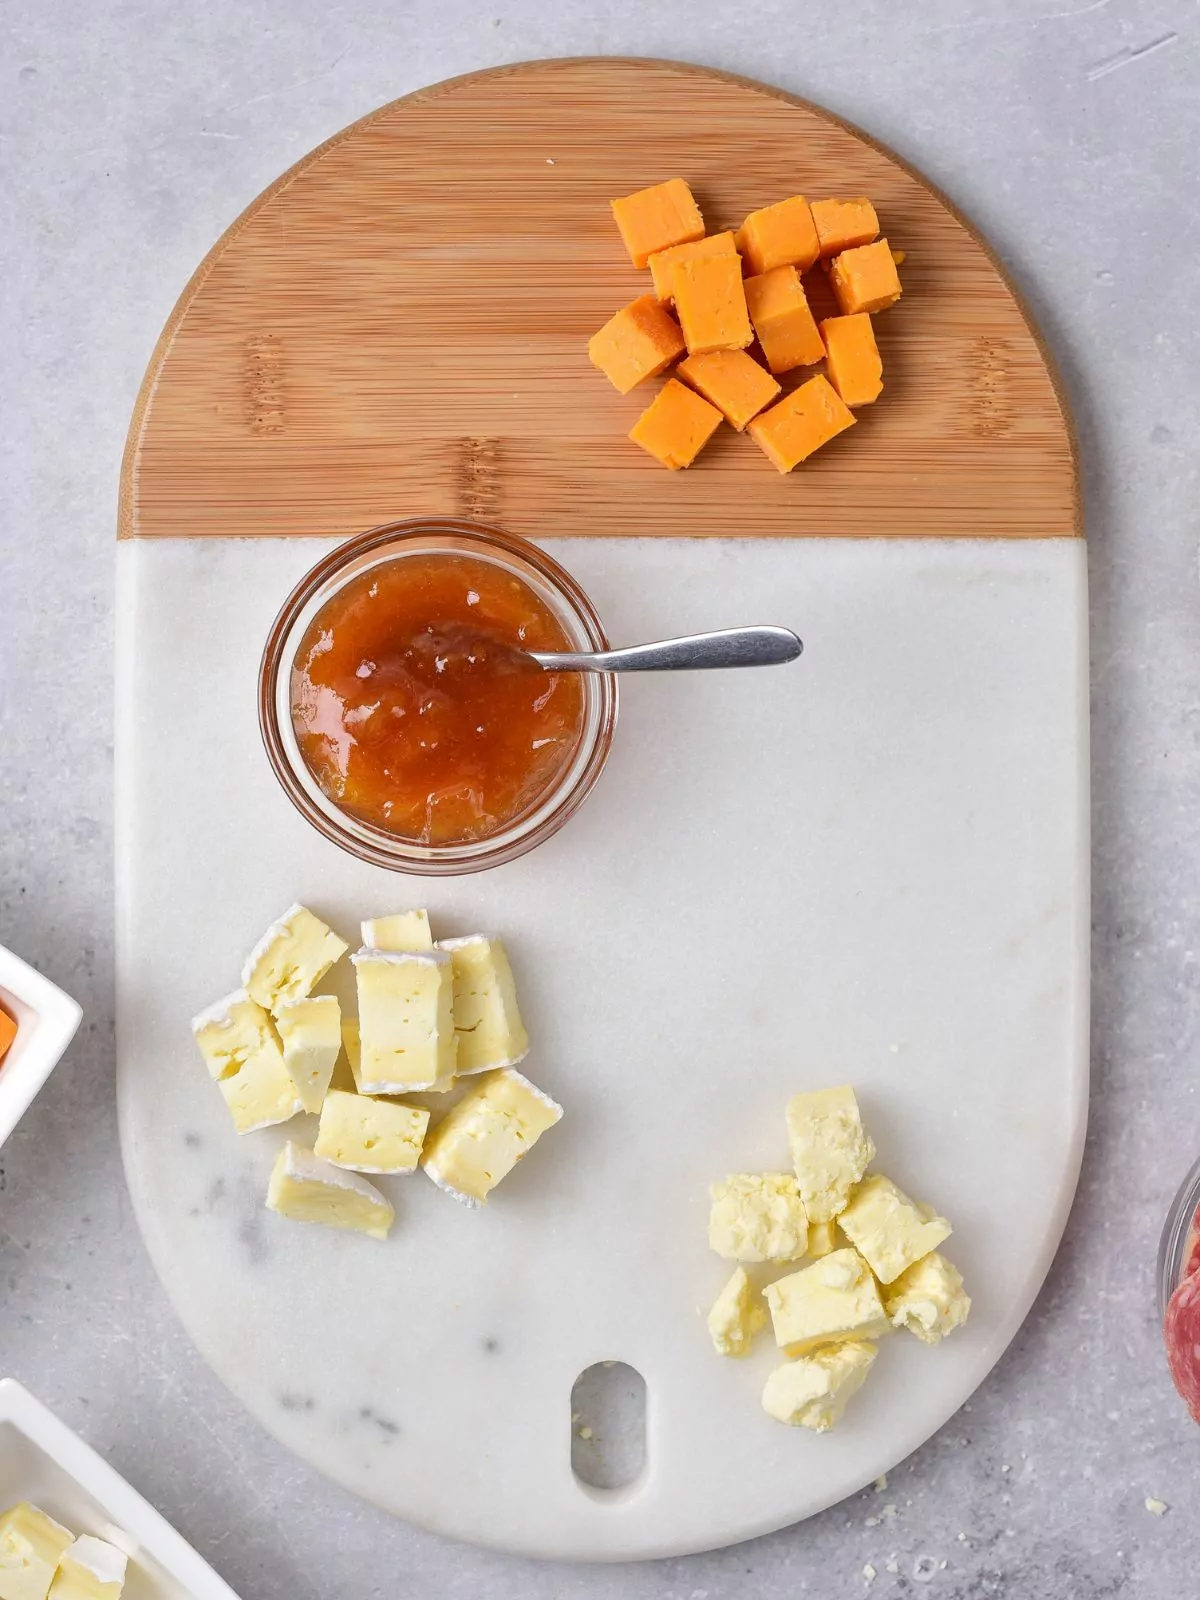 Different cheeses and chutney on cutting board.